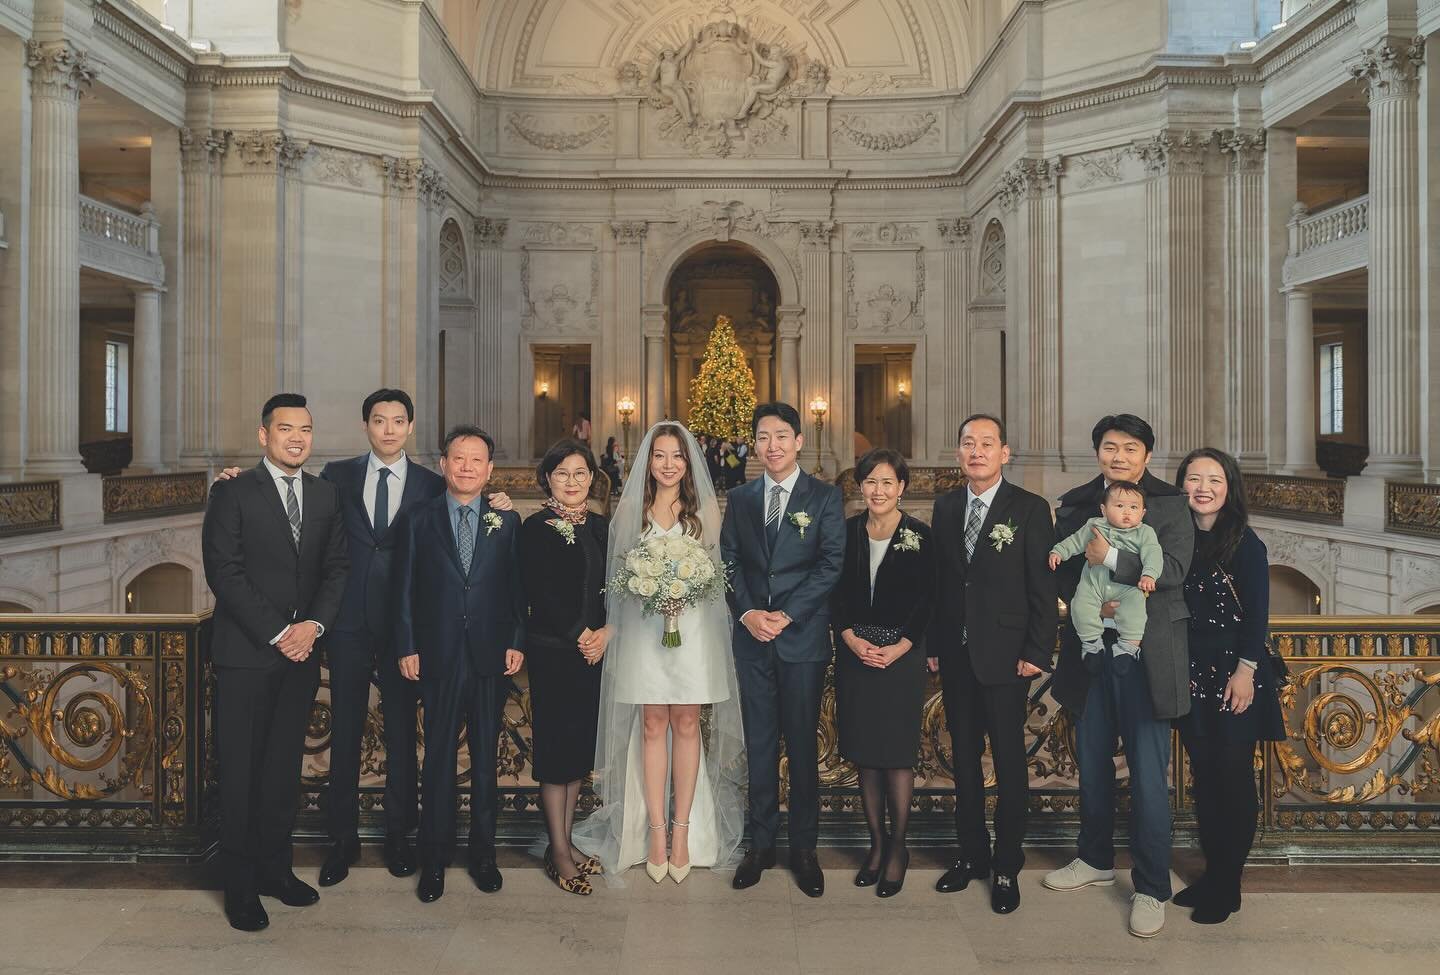 Reserved Wedding at San Francisco City Hall, Mayor&rsquo;s Balcony 💗

It&rsquo;s one of the most beautiful place to hold your wedding indeed!

#sanfranciscowedding #sanfranciscoweddingphotographer #sanfranciscocityhallwedding #sanfranciscocityhallwe